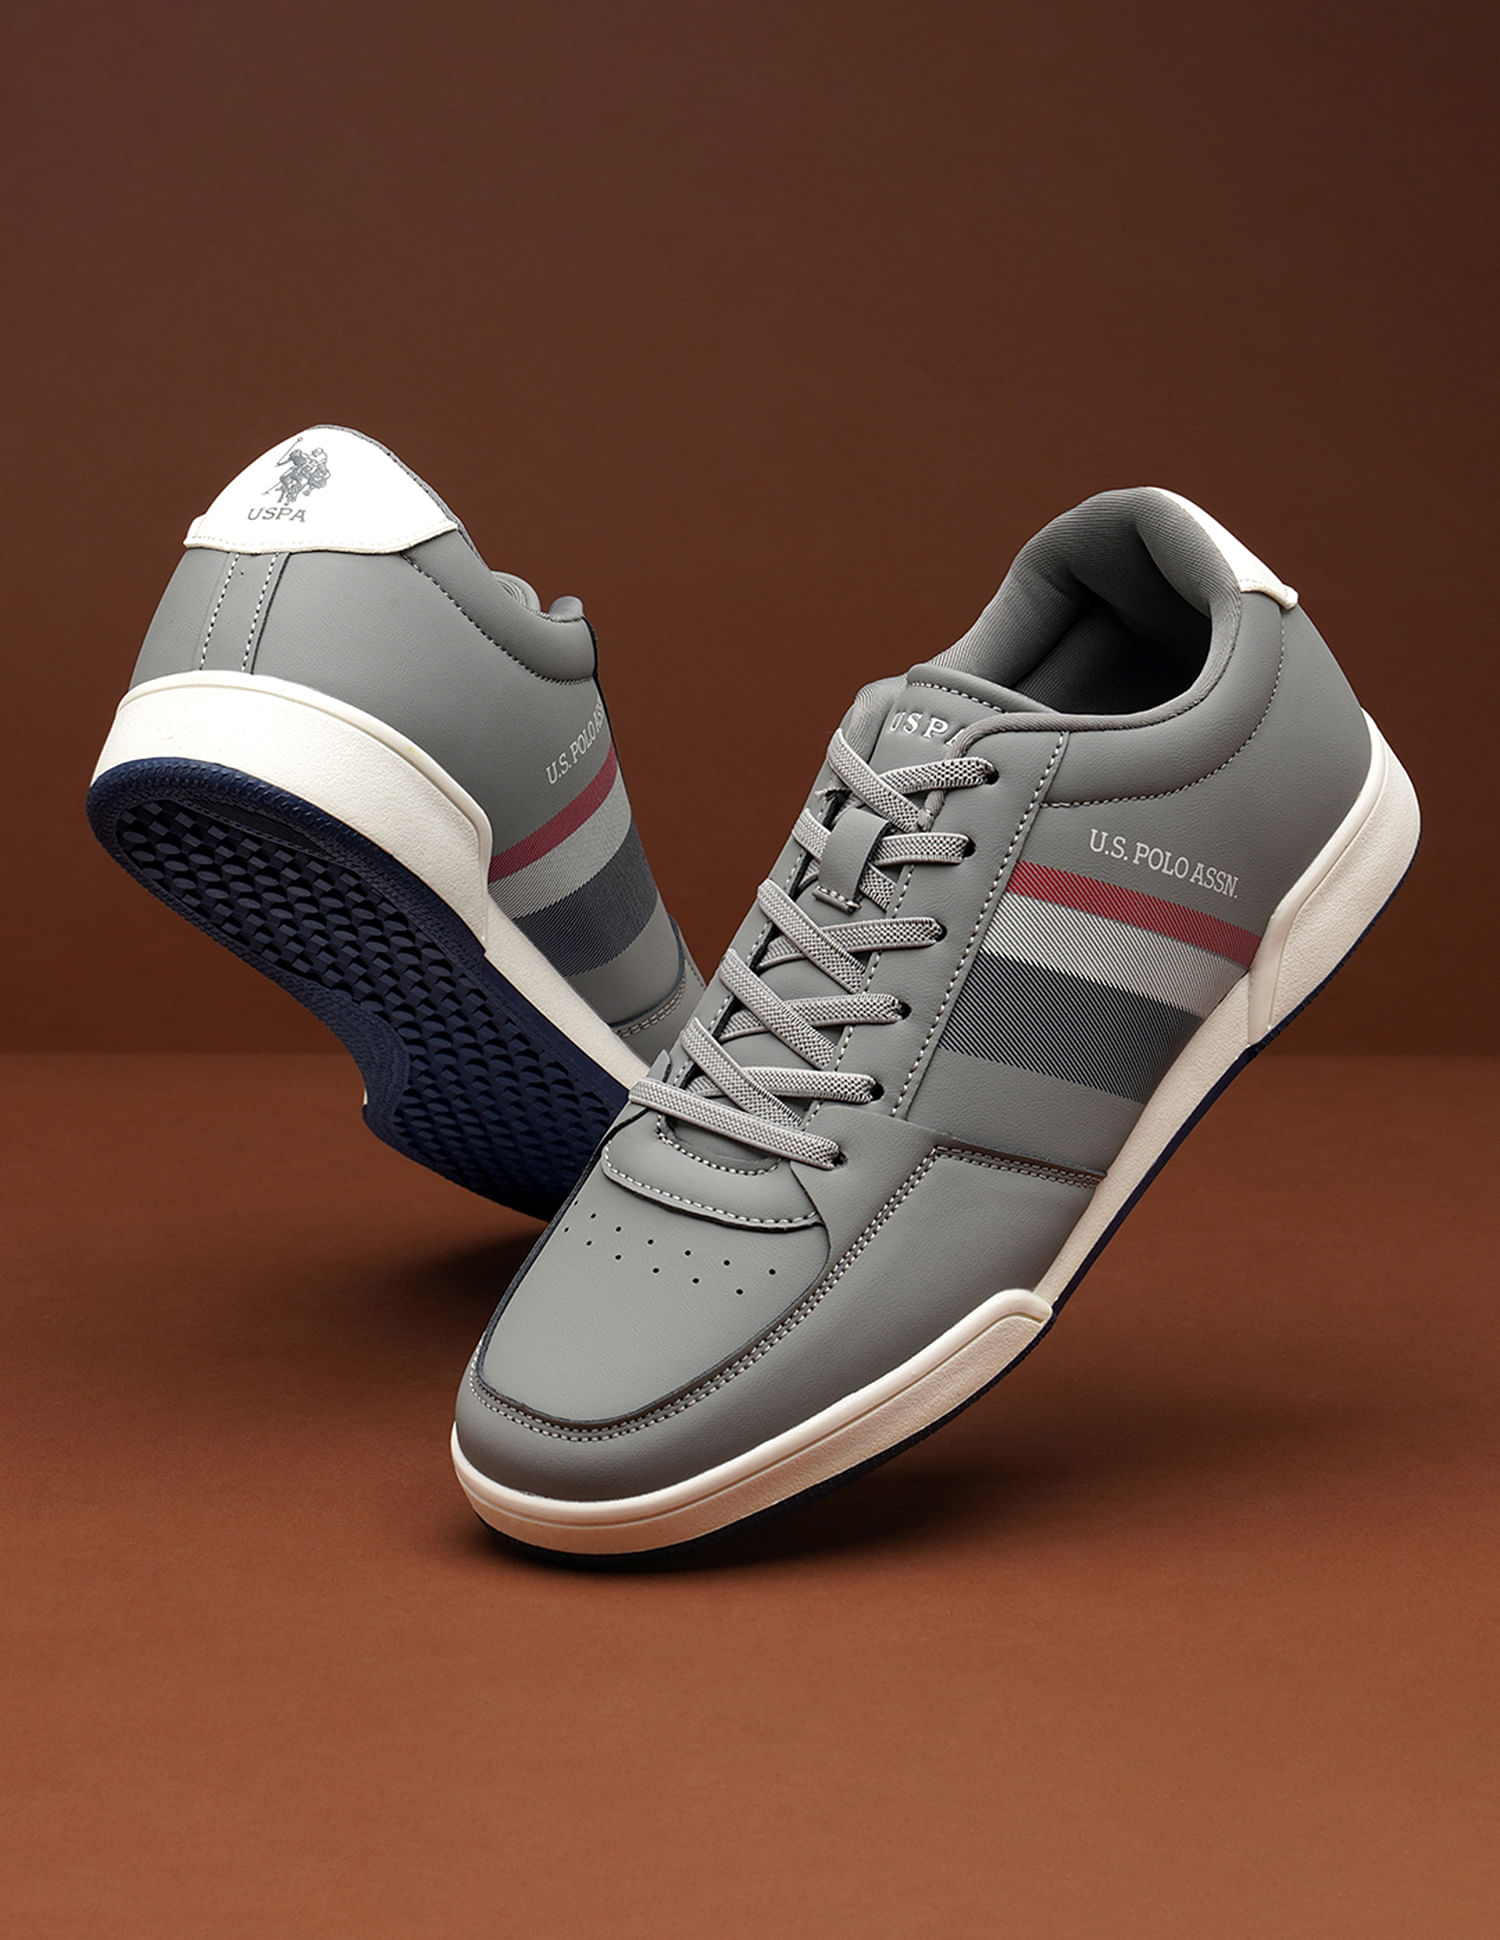 Buy Amp Grey Men Lace-Up Sneakers Online at Regal Shoes. | 9741041